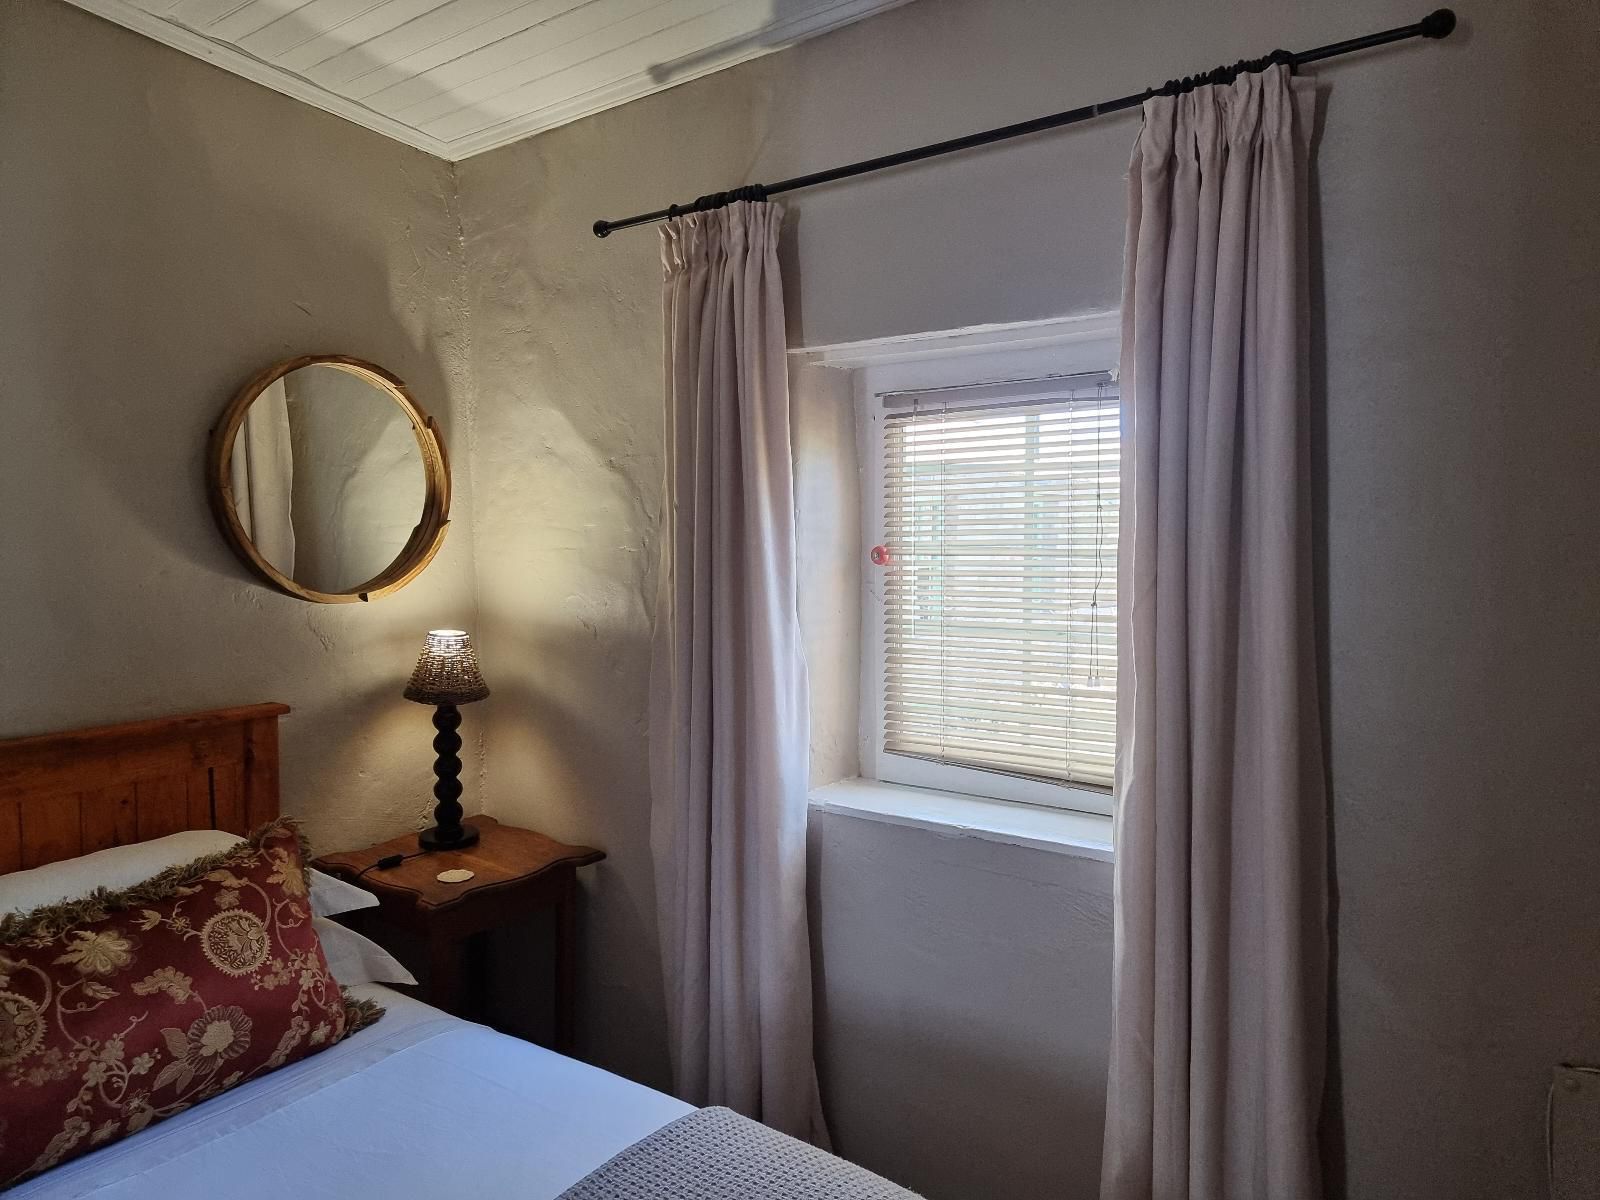 Perlman House Sutherland Northern Cape South Africa Window, Architecture, Bedroom